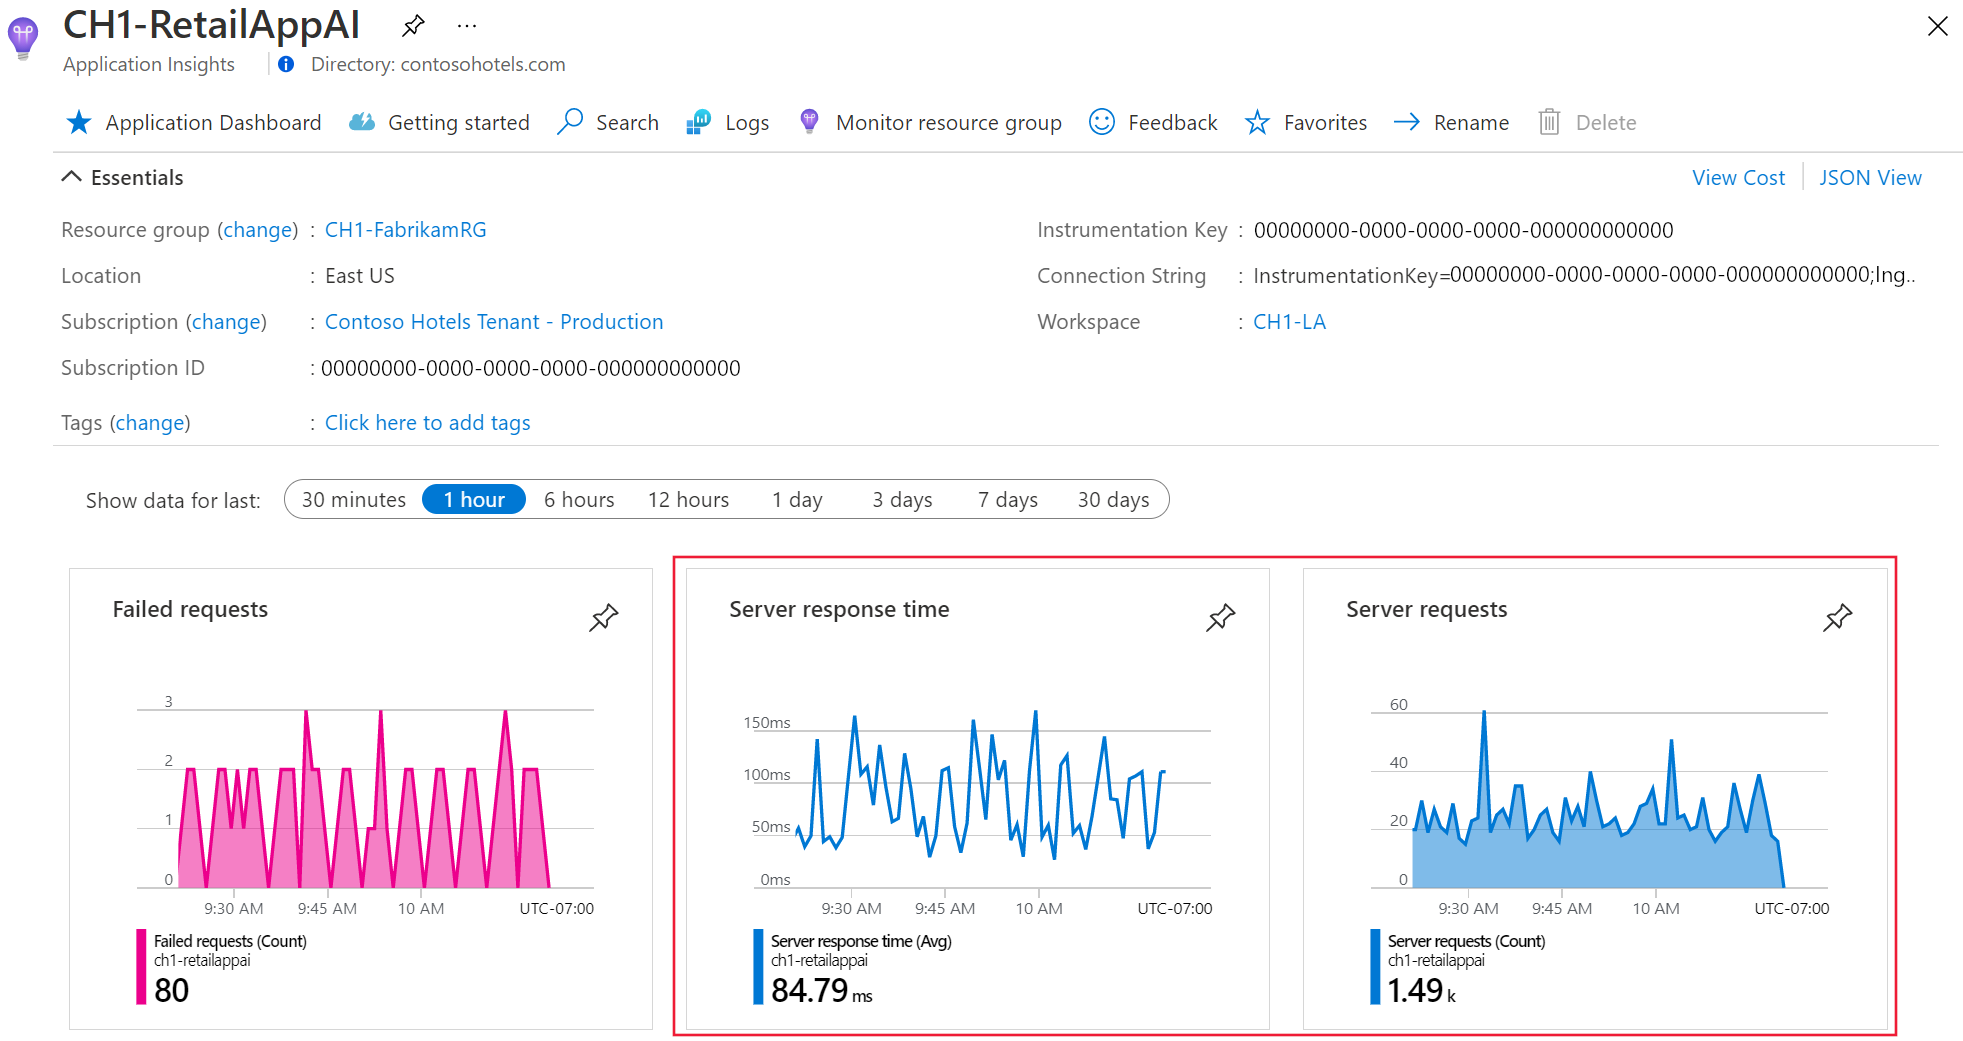 Screenshot of the Application Insights Overview tab with server requests and server response time highlighted.